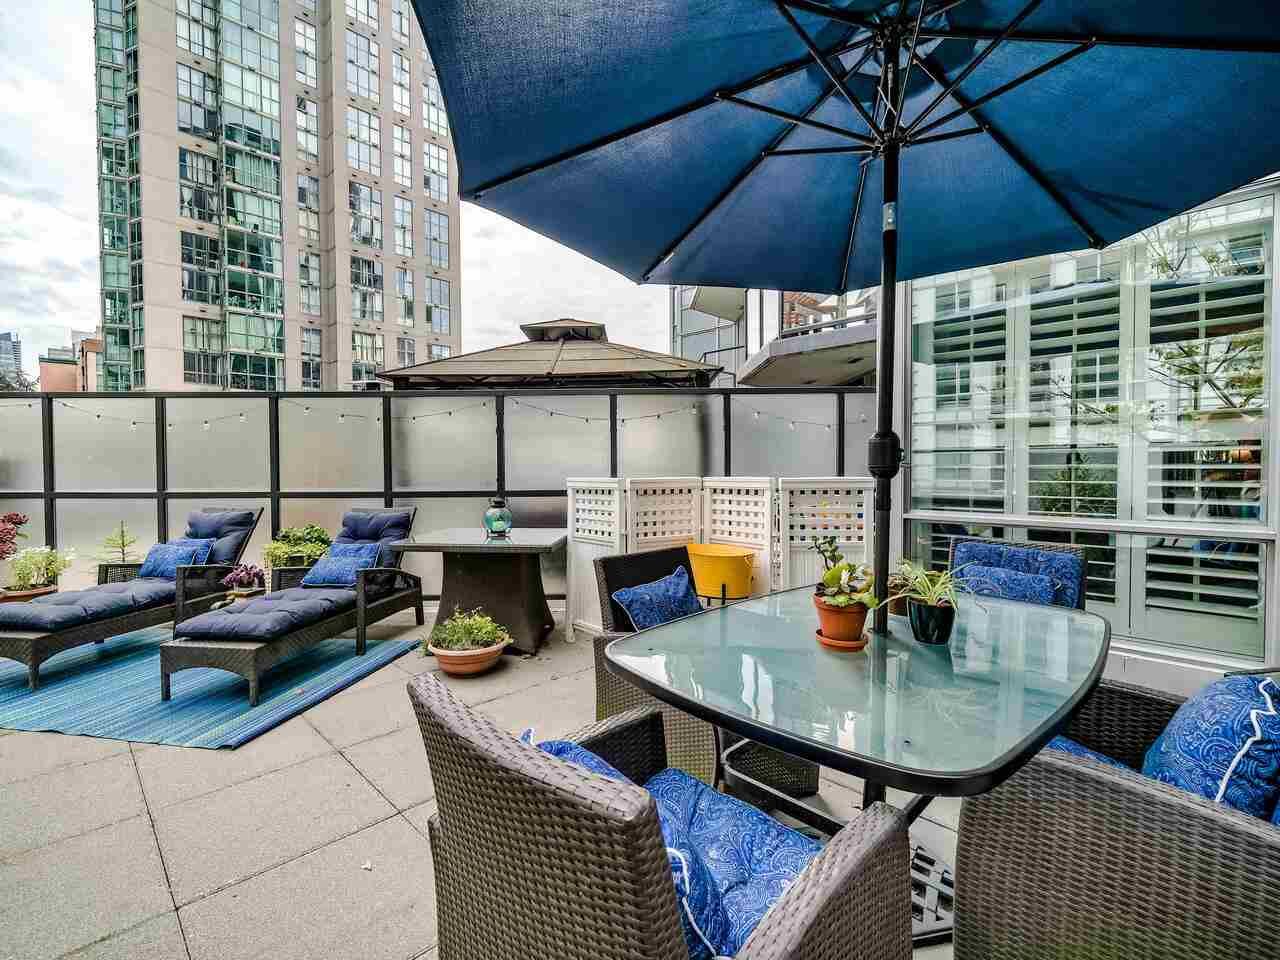 Main Photo: 305 1212 HOWE Street in Vancouver: Downtown VW Condo for sale (Vancouver West)  : MLS®# R2515062